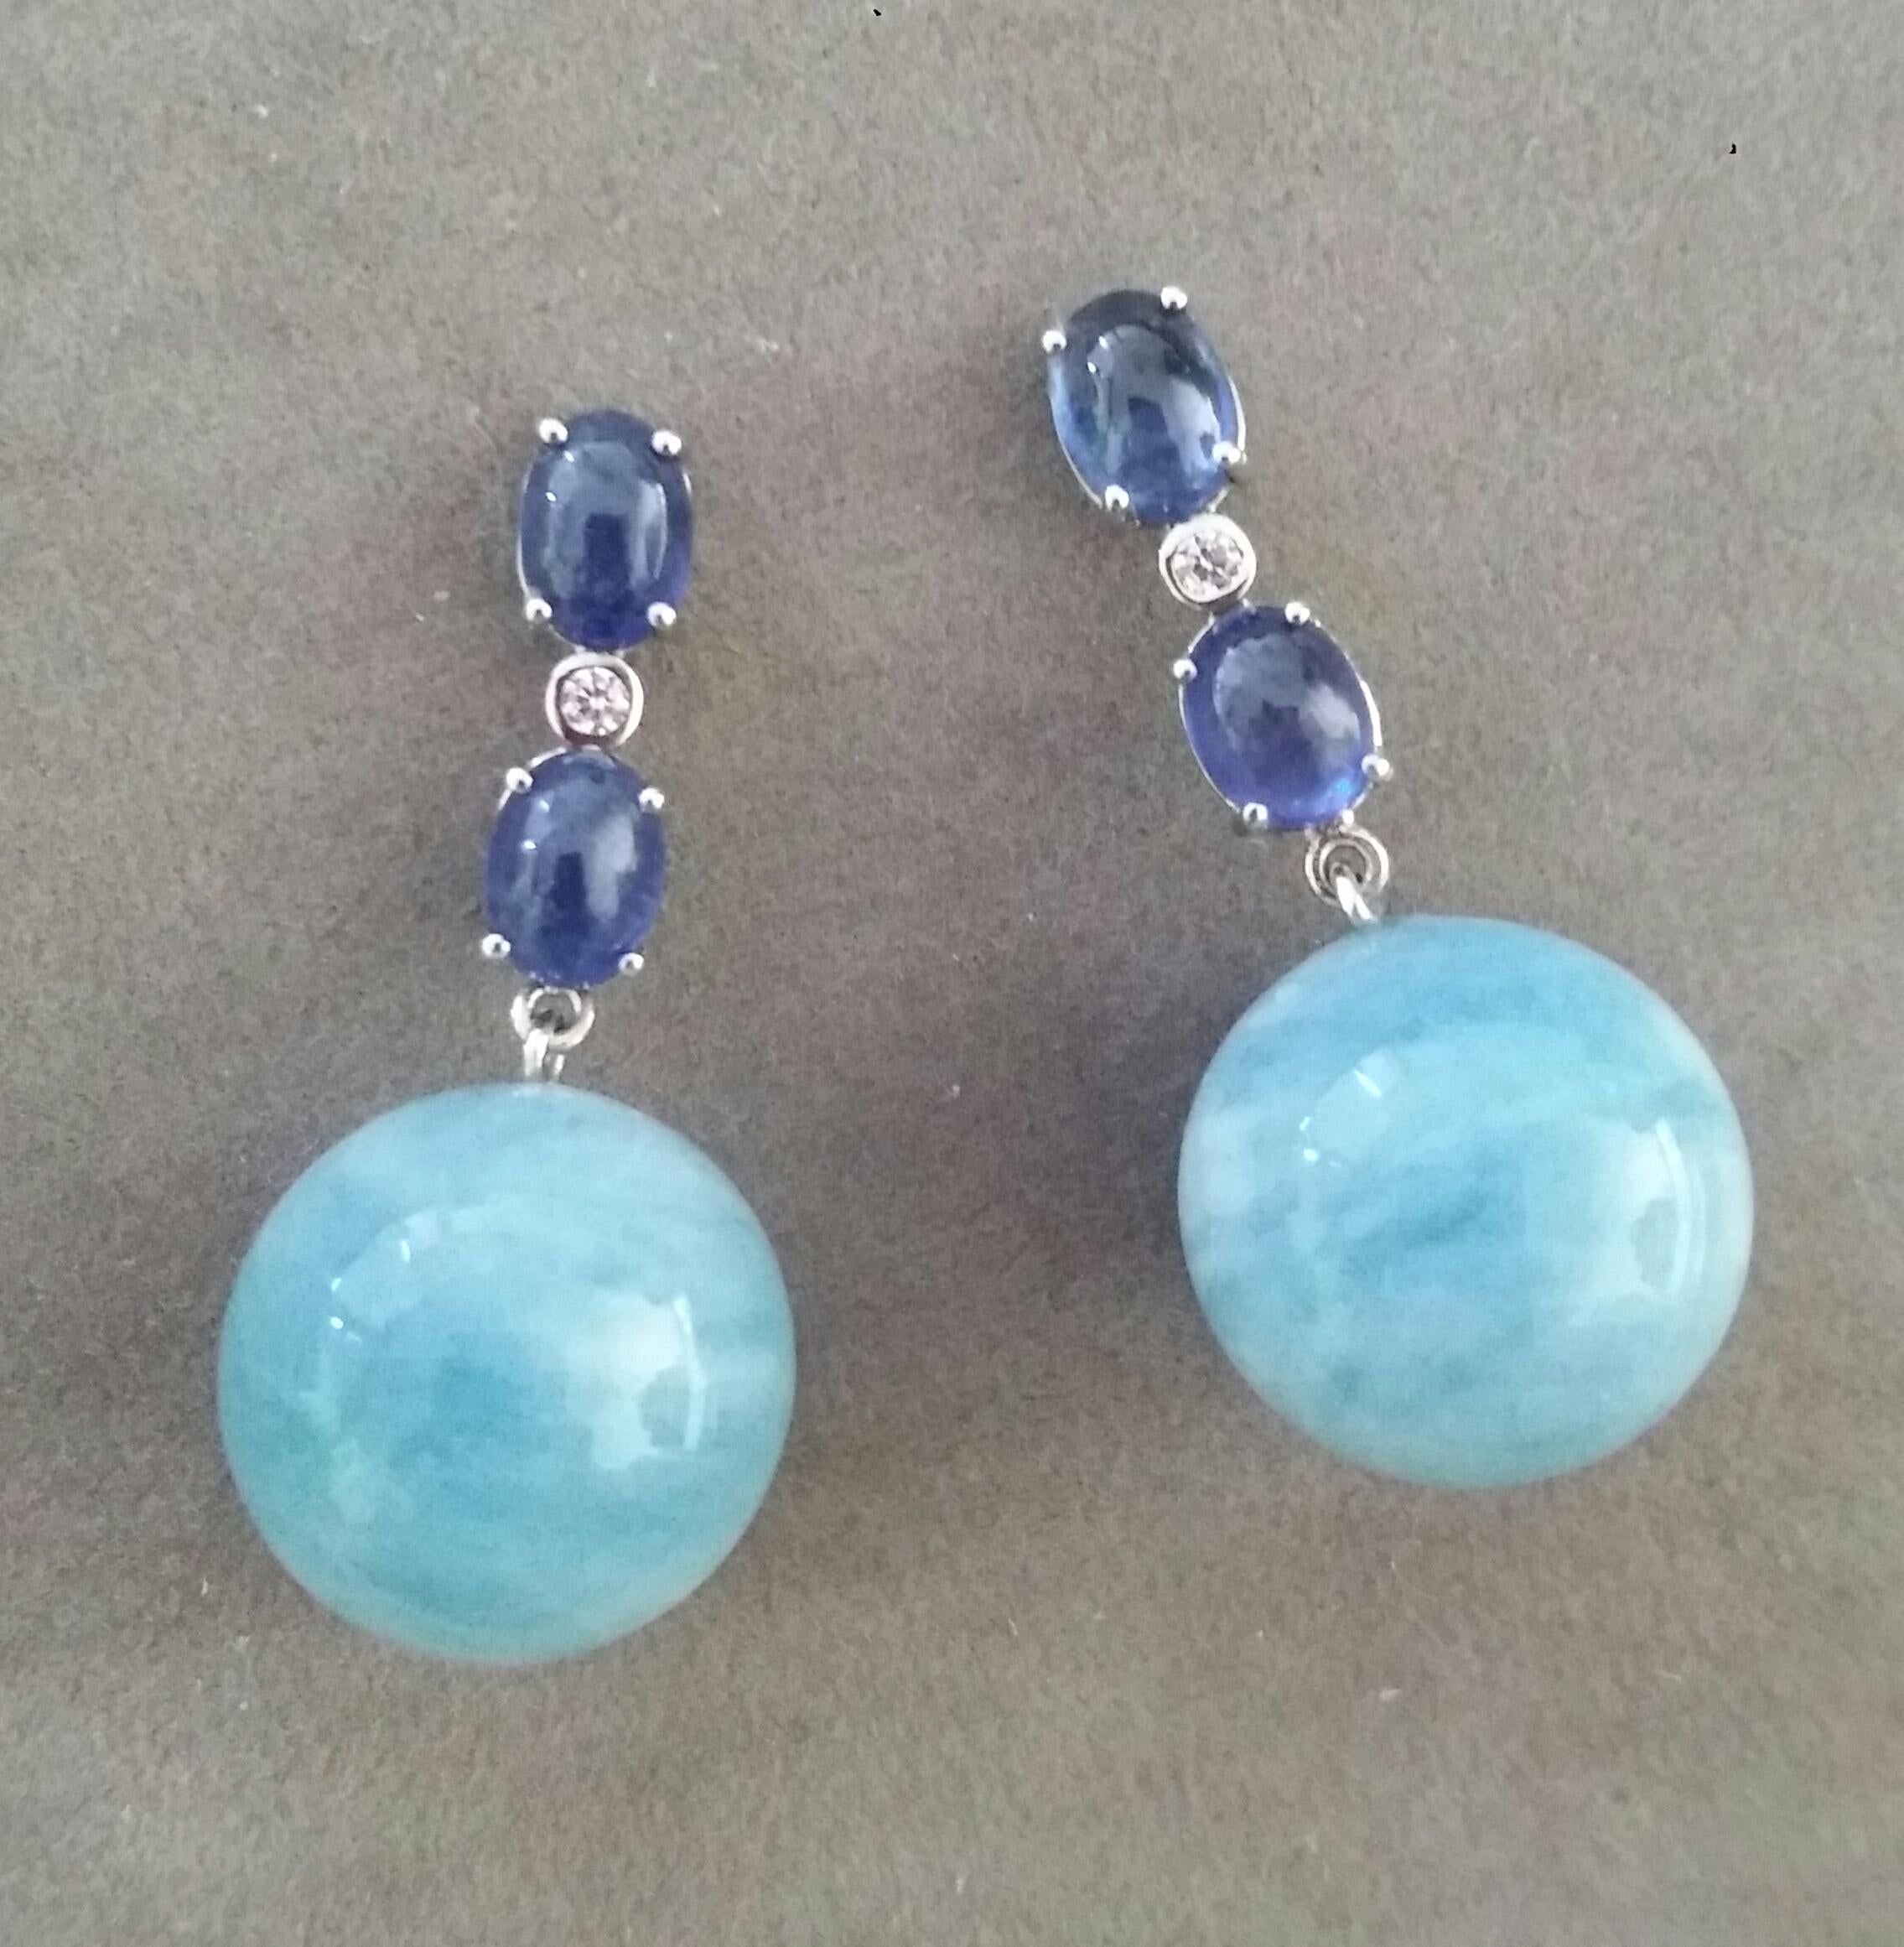 Mixed Cut 2 Blue Sapphire Oval Cabs White Gold Diamonds Aquamarine Round Beads Earrings For Sale